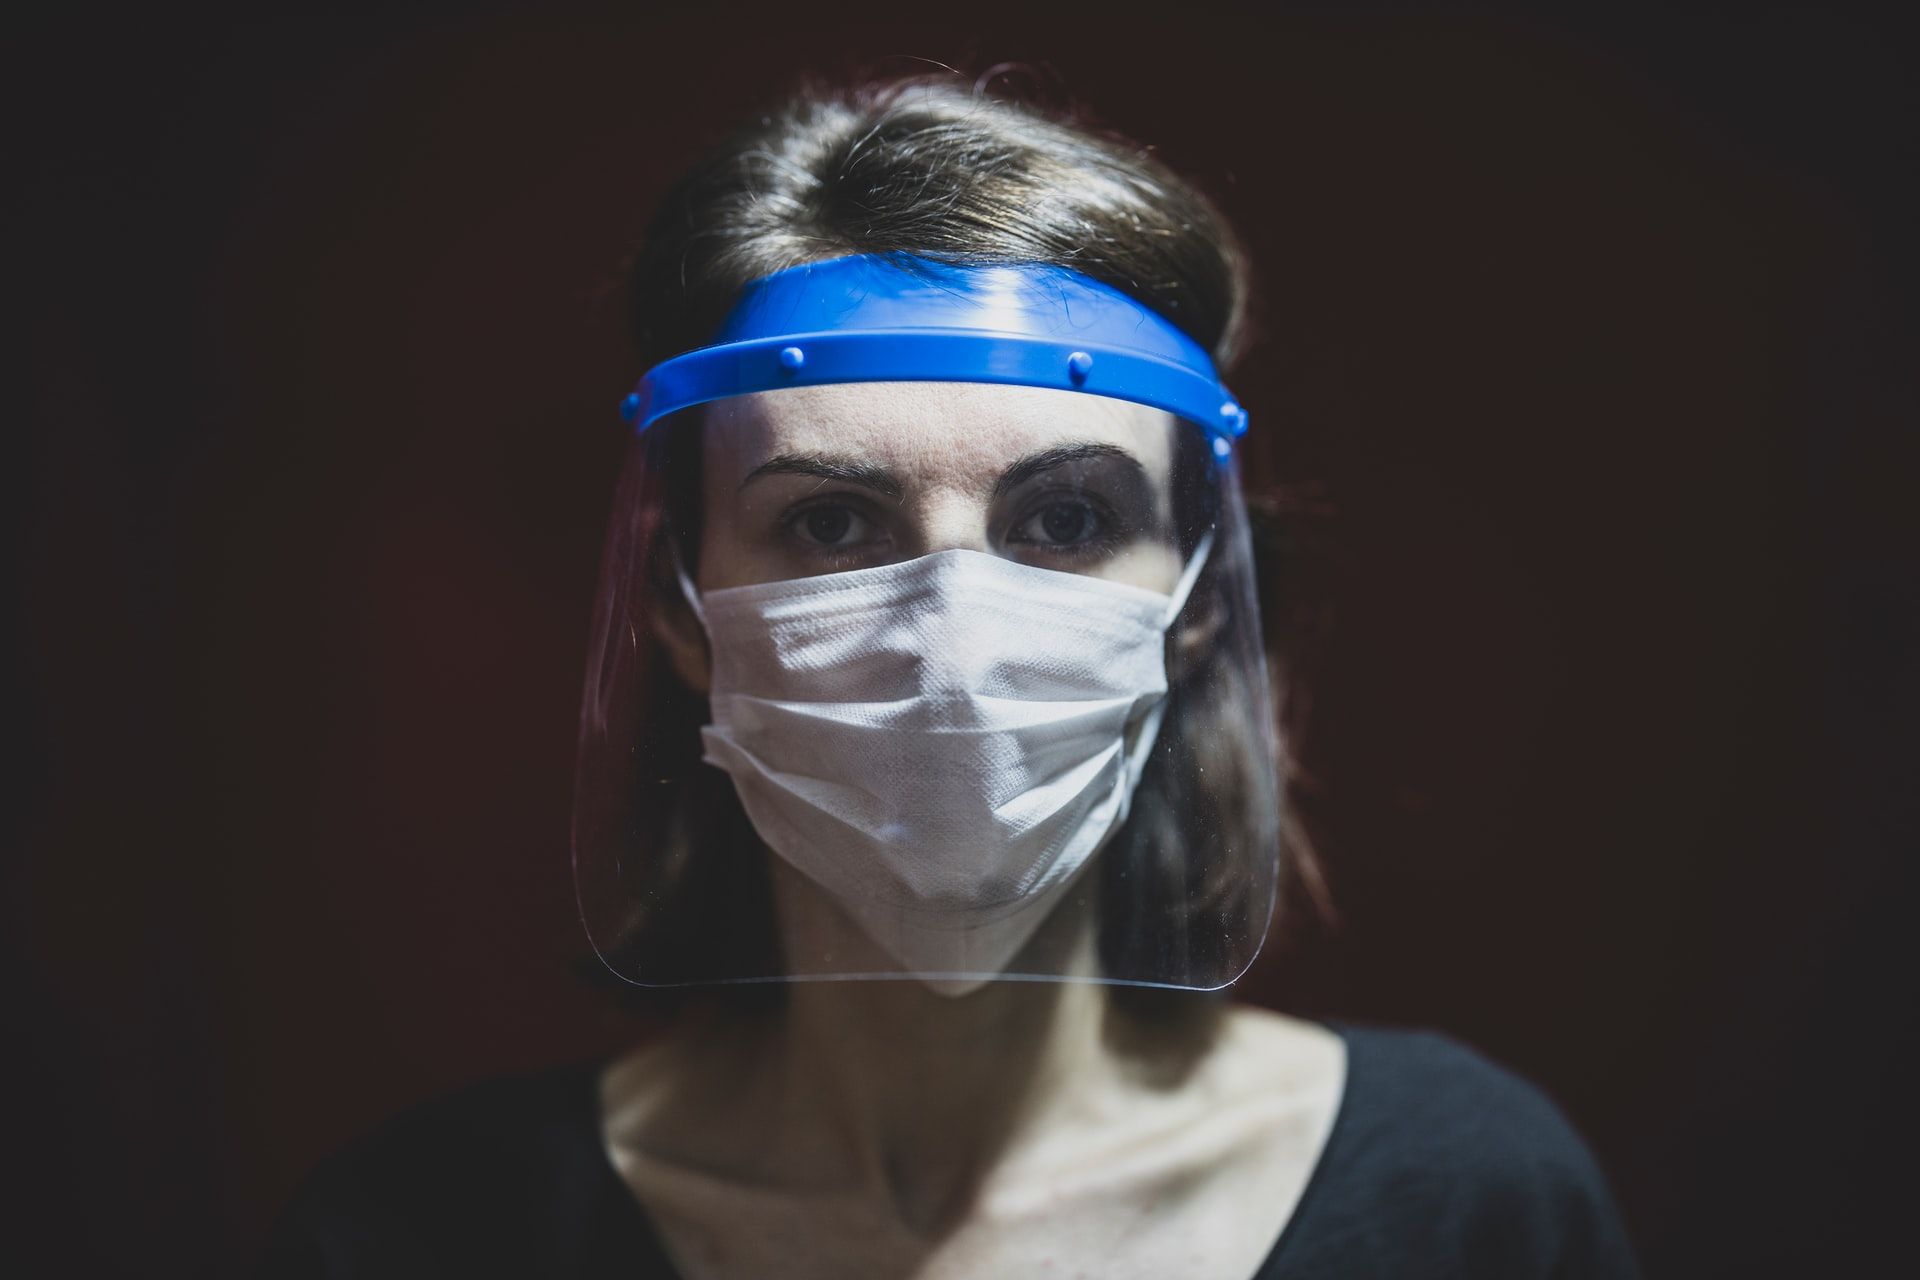 Face shields worn alone are not effective against COVID-19, says study